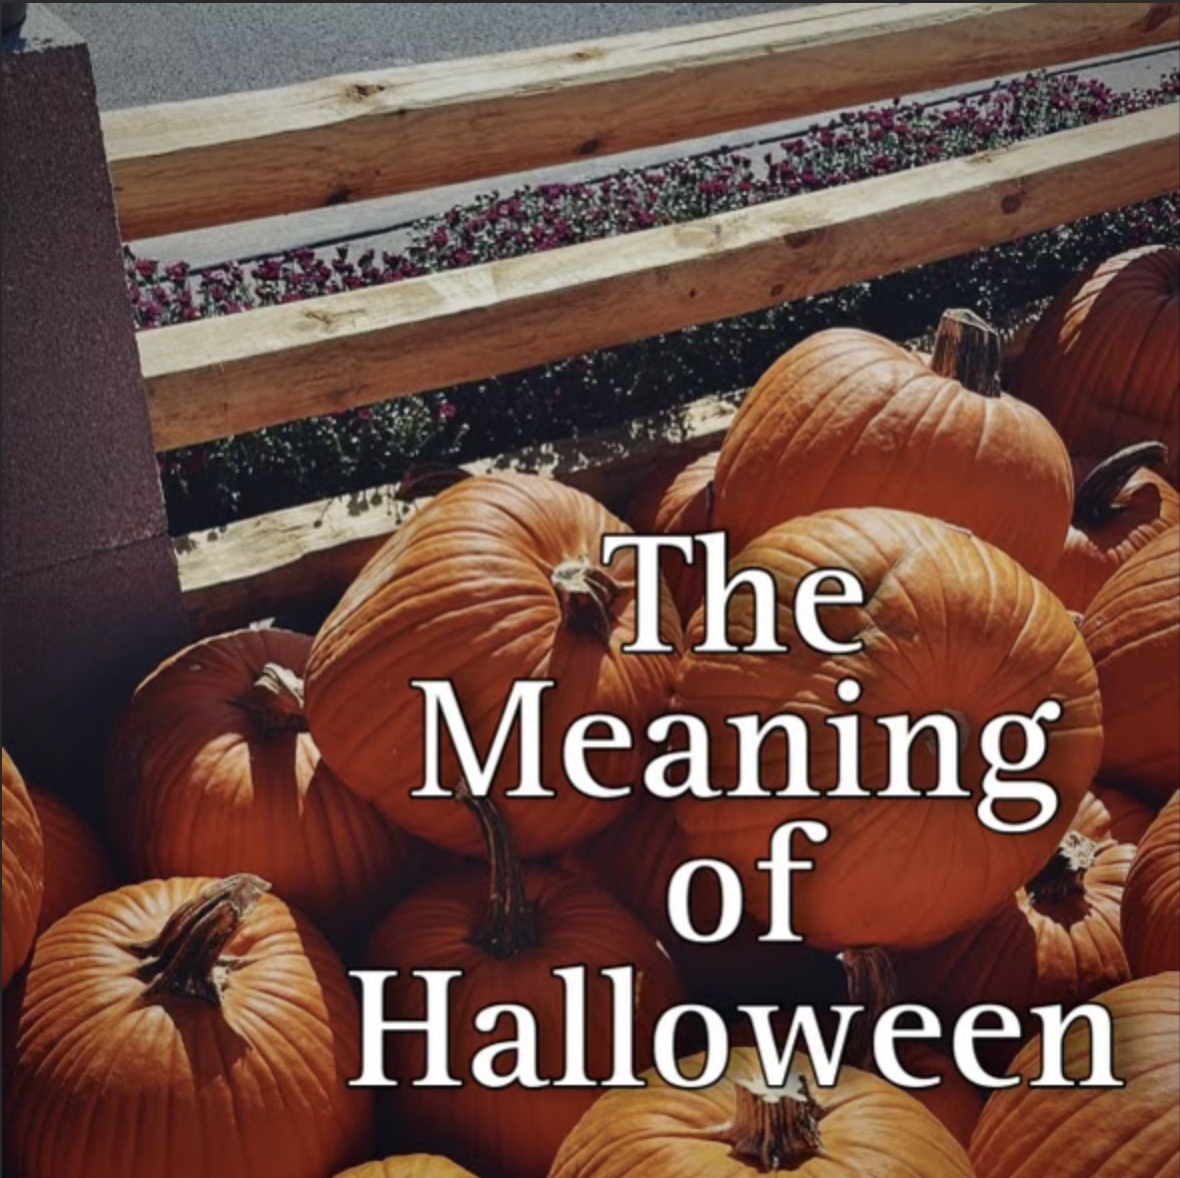 THE MEANING OF HALLOWEEN